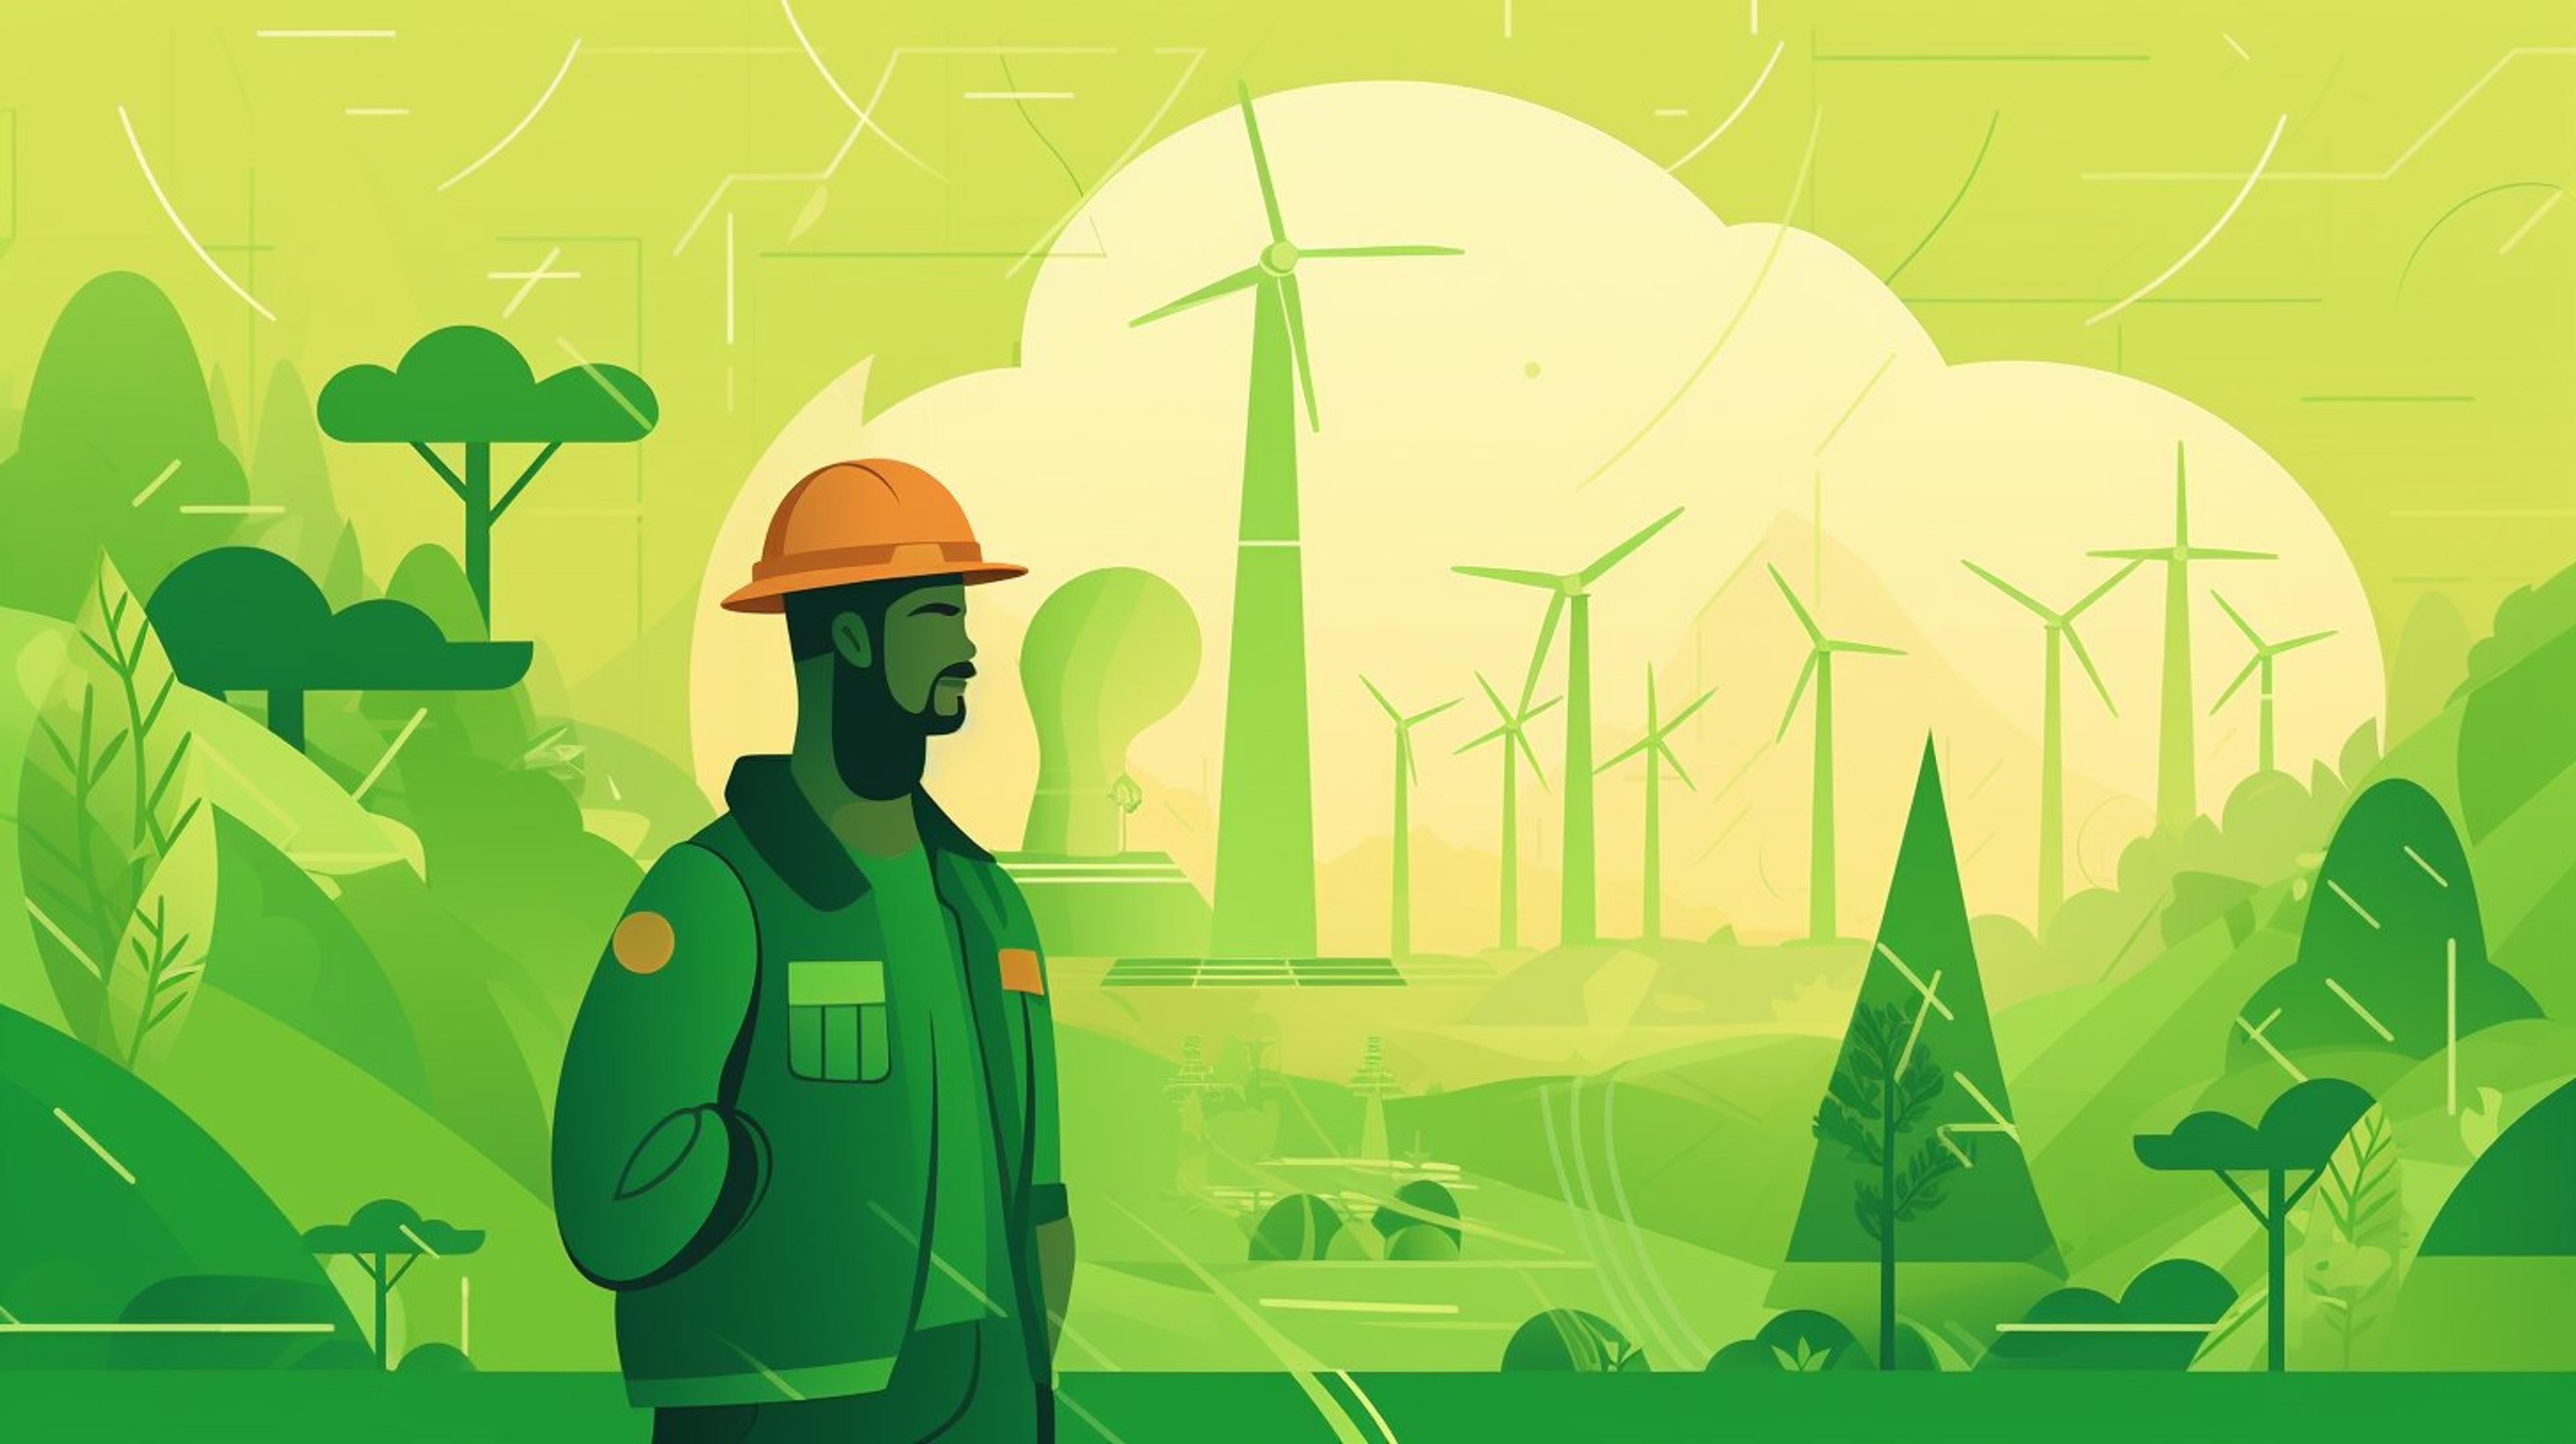 Renewable Energy Jobs: Careers in Solar, Wind, and Hydro Power